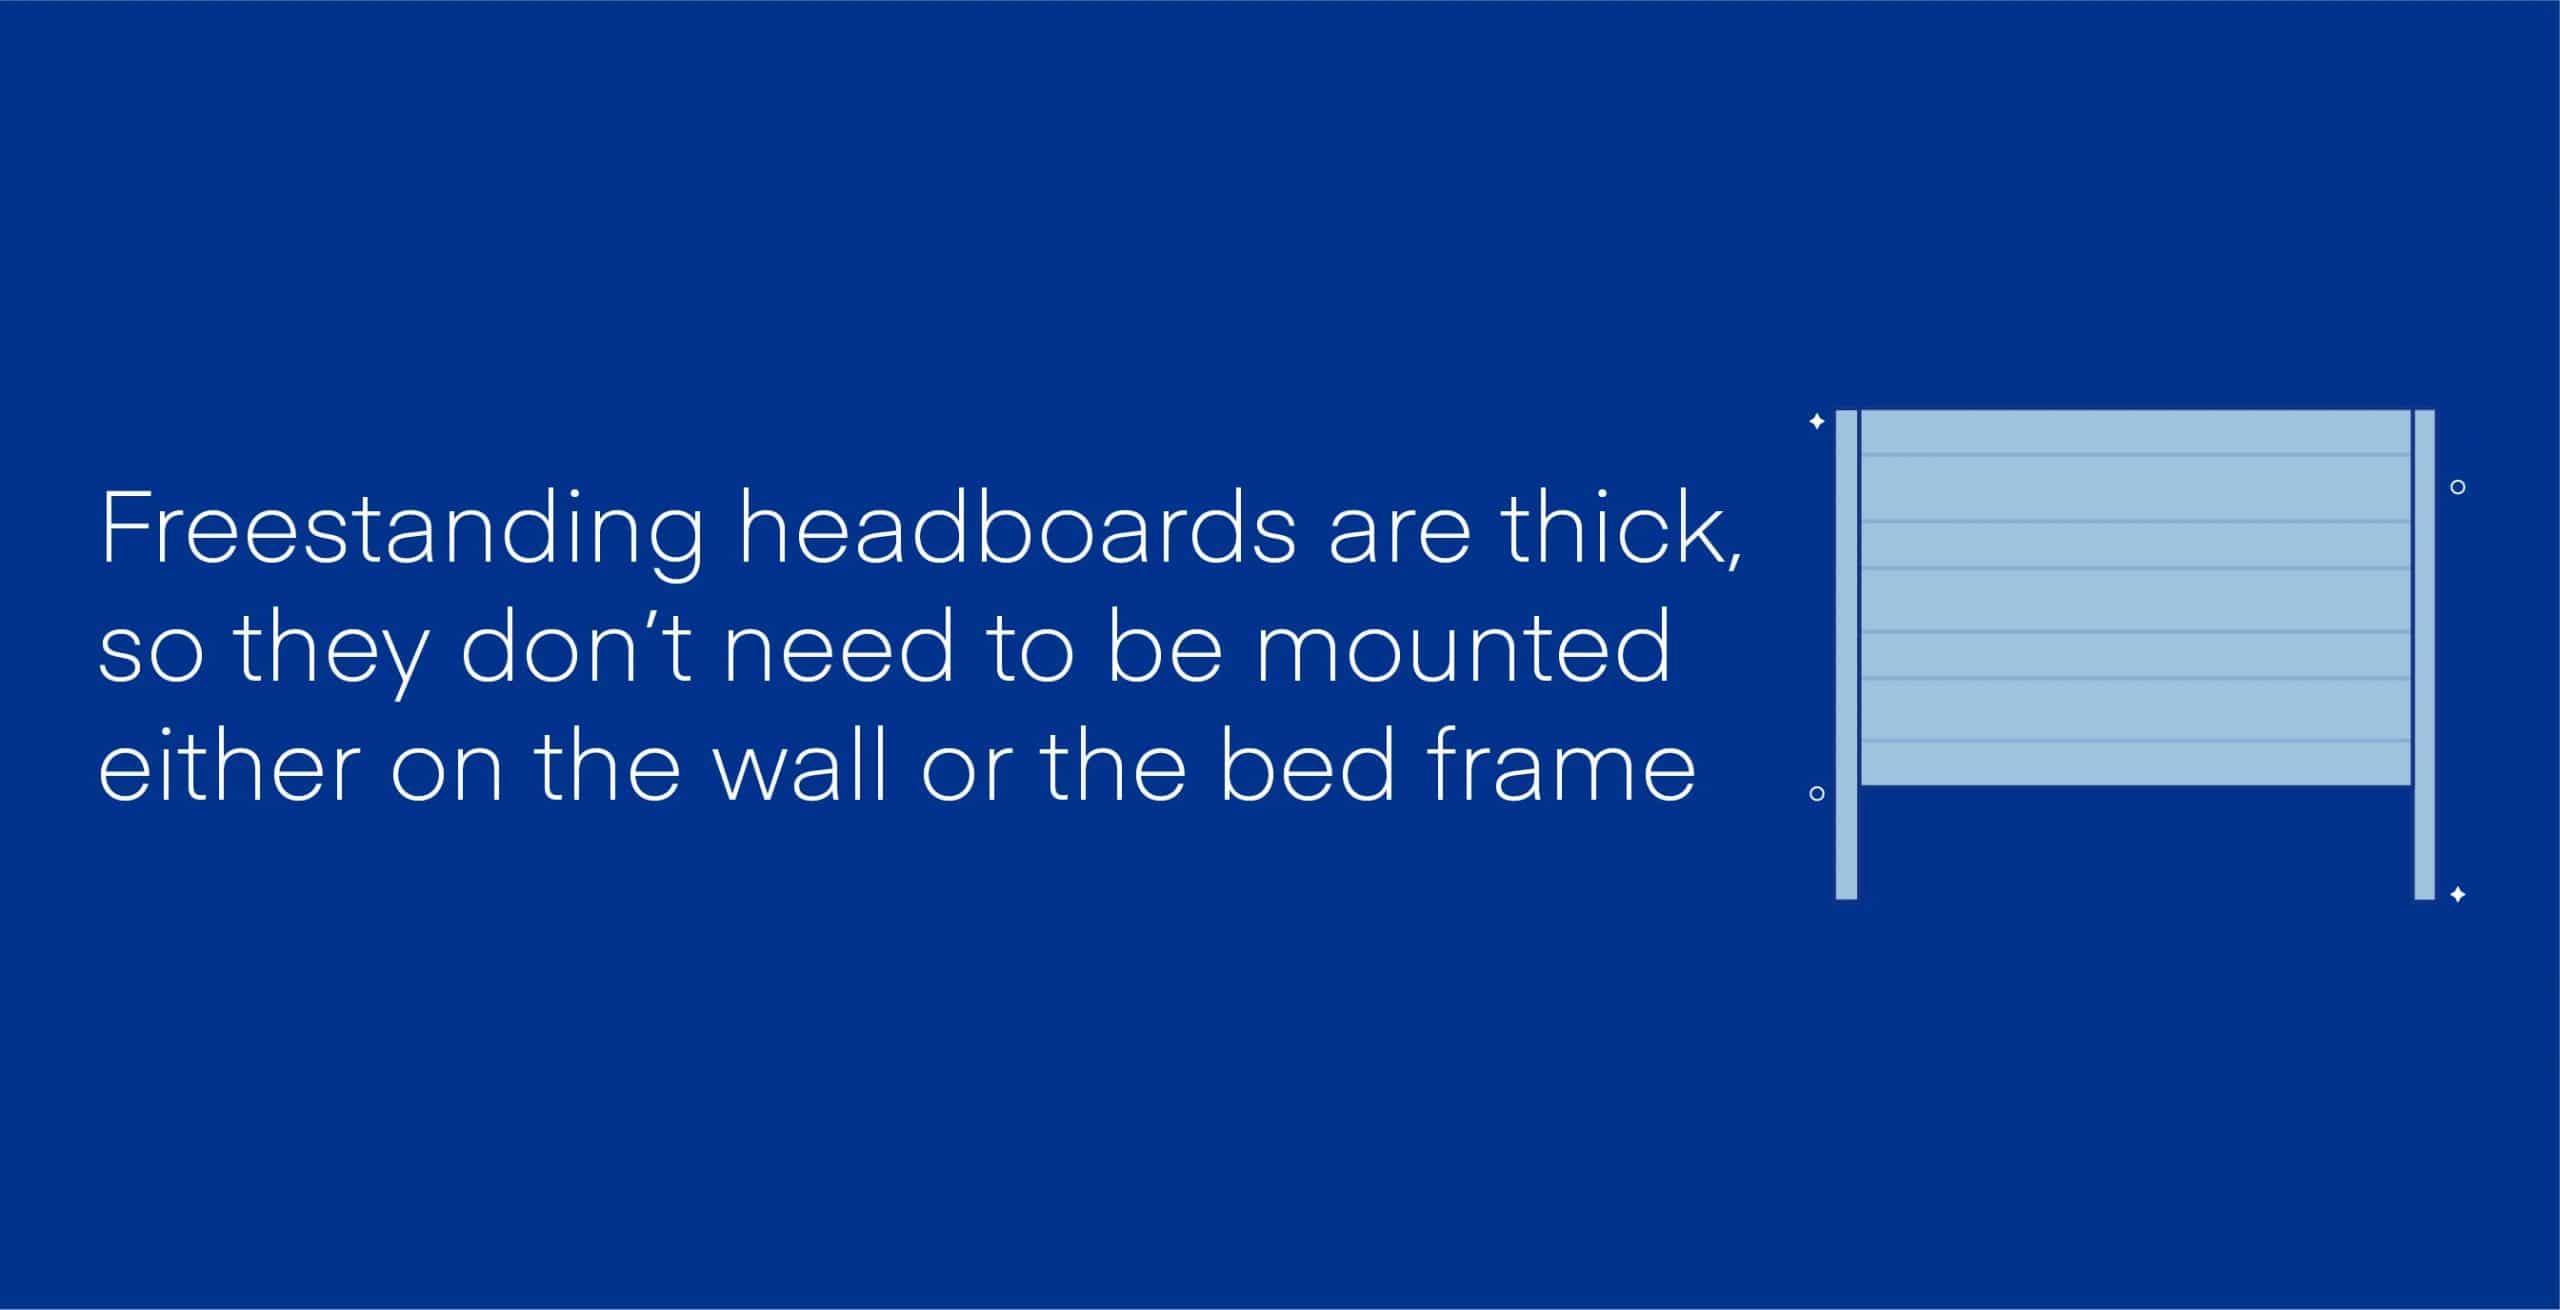 How To Install A Headboard Amerisleep, How To Attach Headboard Frame Without Holes